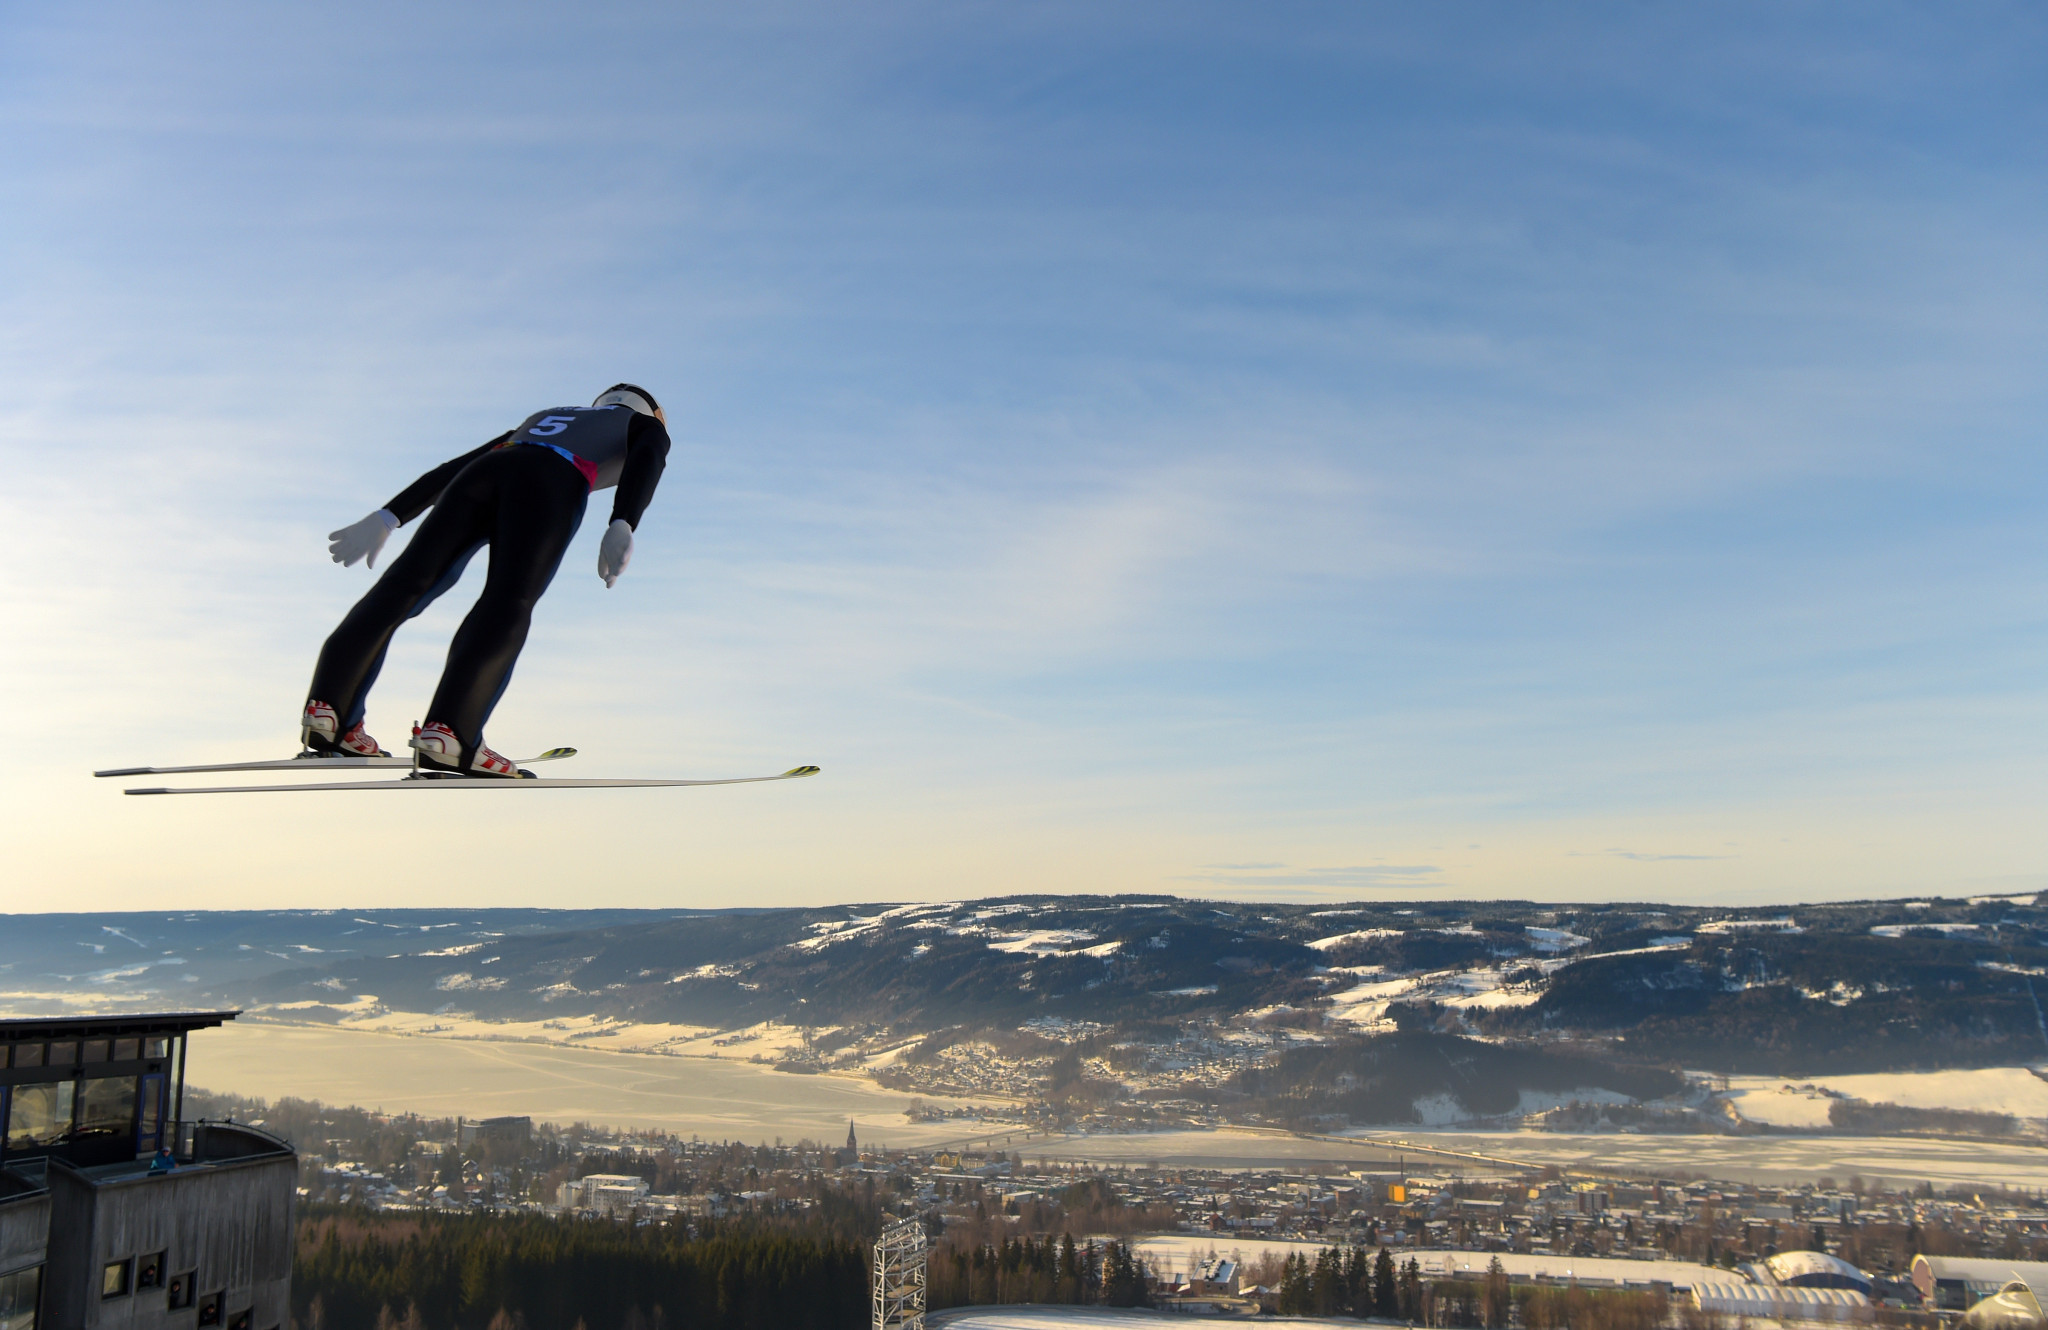 The Lillehammer International Nordic Combined Camp is set to be held at the Lillehammer Olympic Legacy Training Centre, established following the 2016 Youth Olympics ©Getty Images